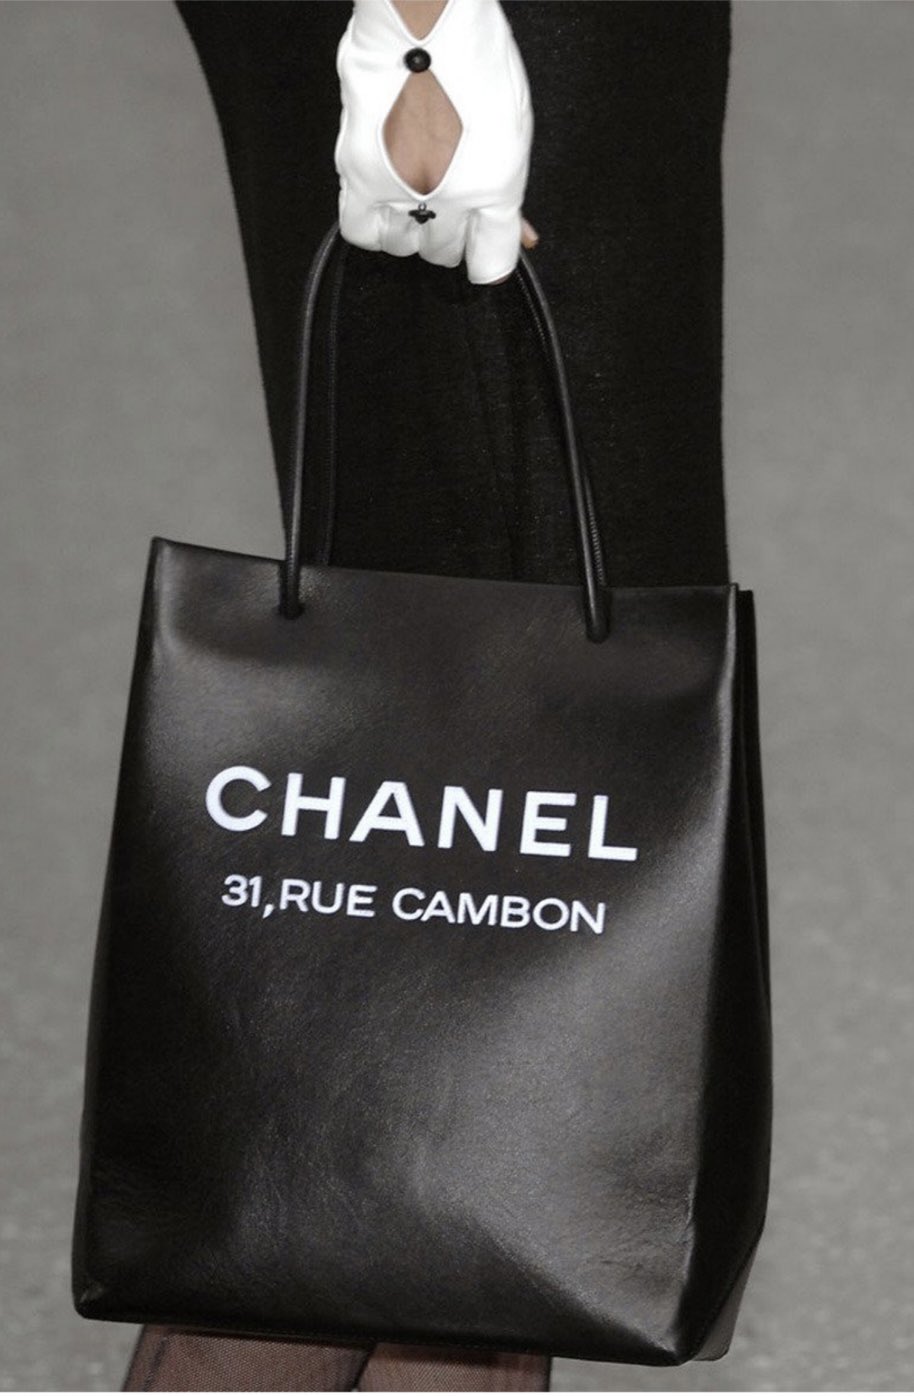 K E I S H on X: While she went viral for her DIY interpretation in 2021,  purses that are replicas of paper shopping totes are not new. Chanel showed  their essential